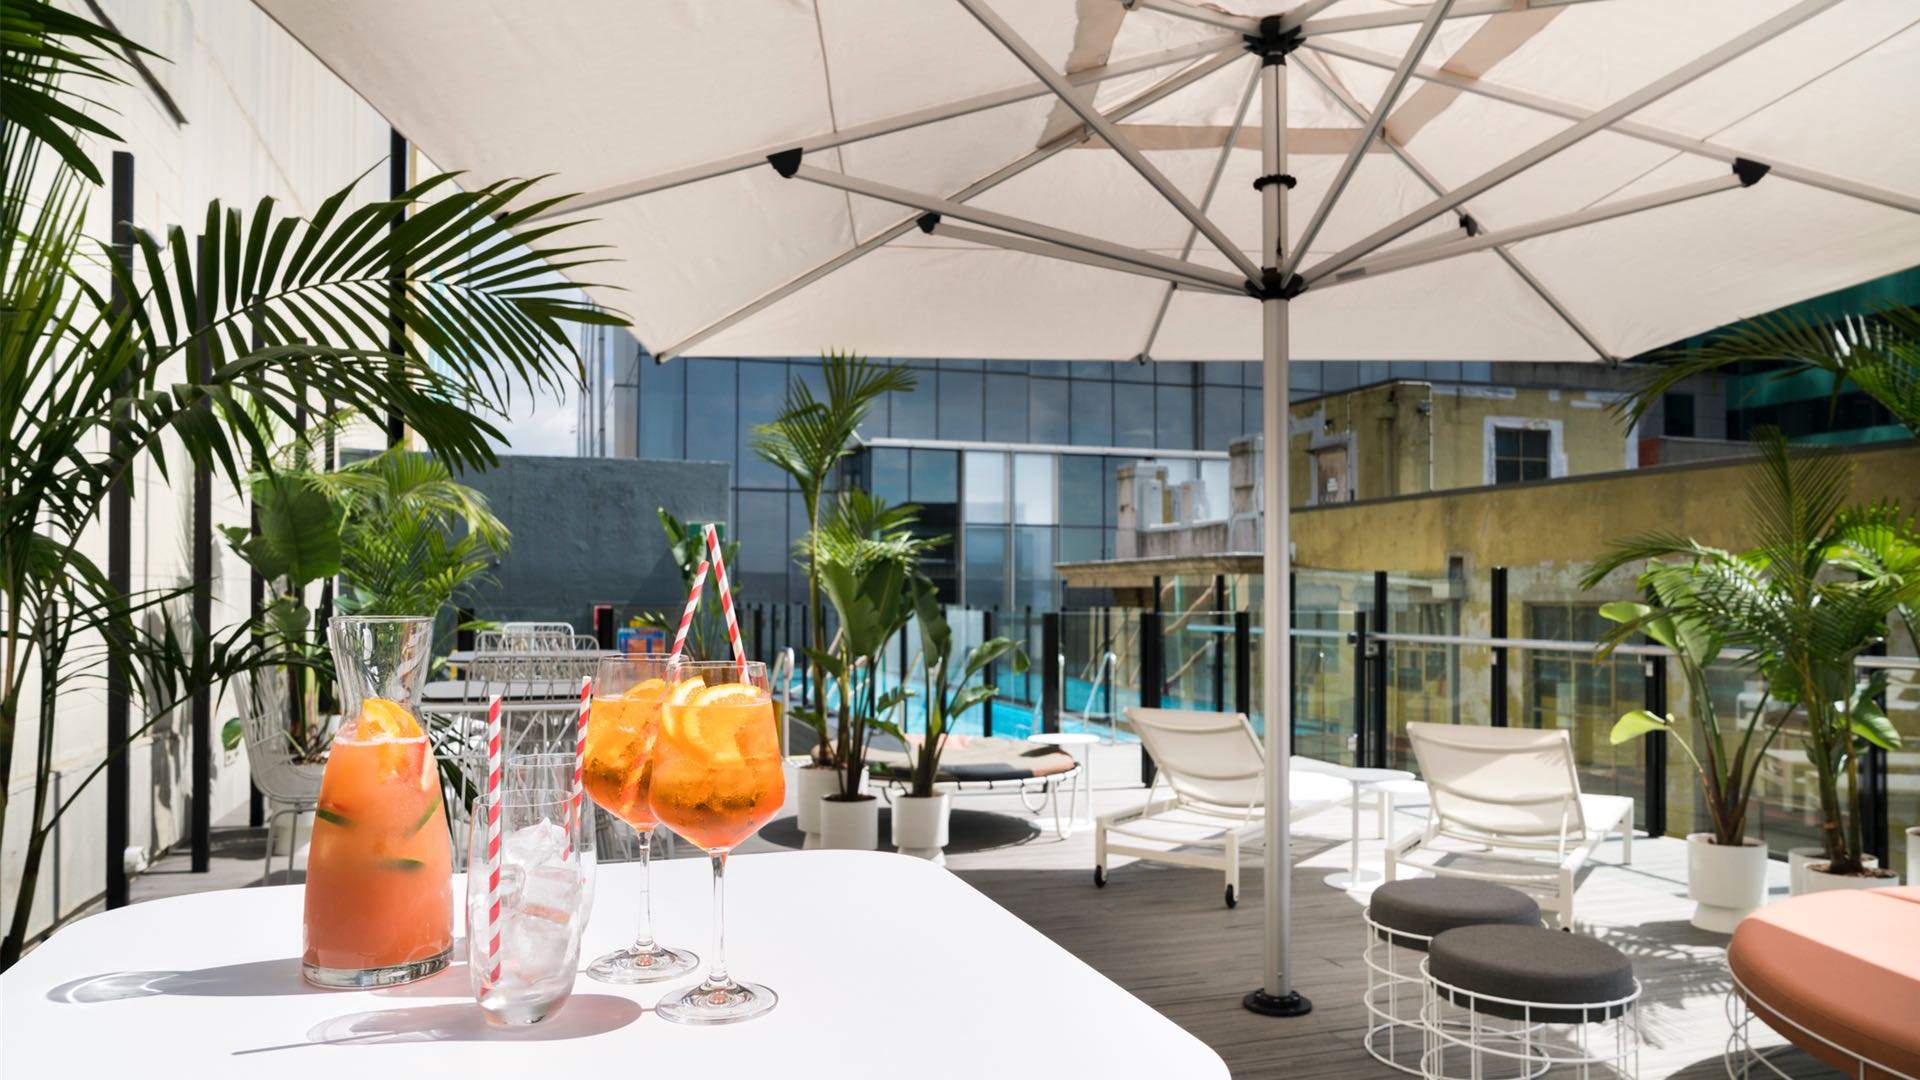 Adelphi Hotel's Revamped Pool Deck Is the Ultimate Way to Escape the Scorching CBD Streets